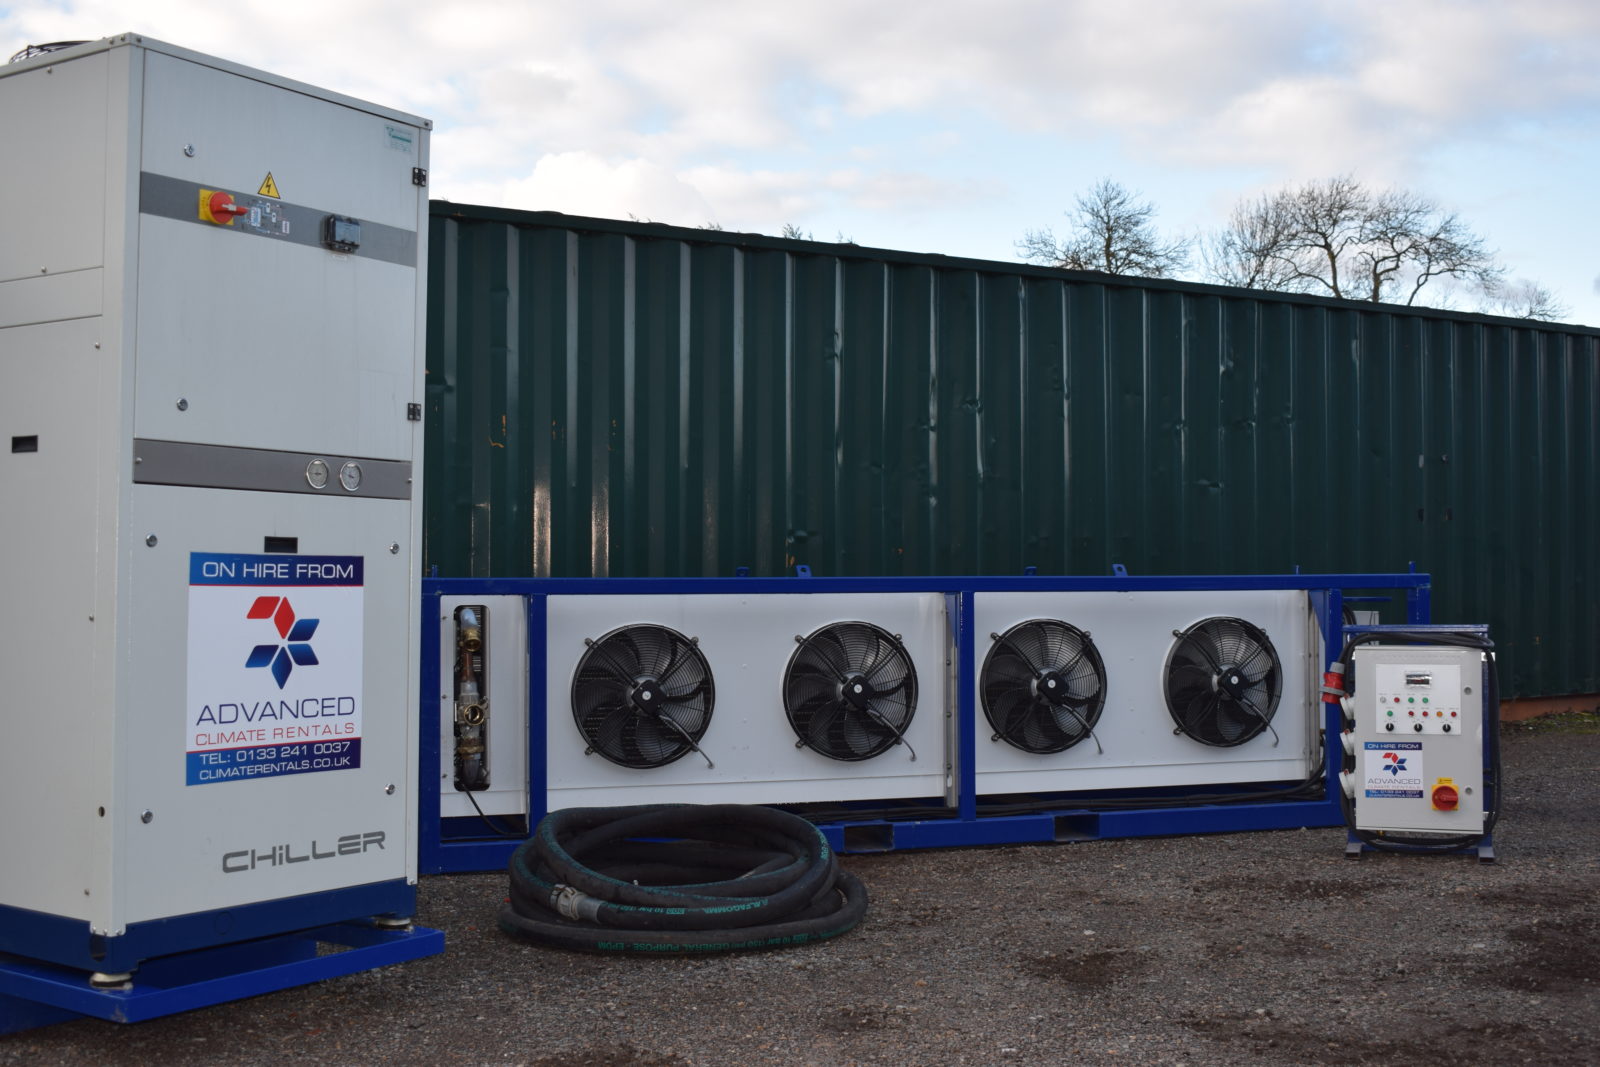 Temporary cold store cooling systems. Portable units can be easily installed to support cold store operation